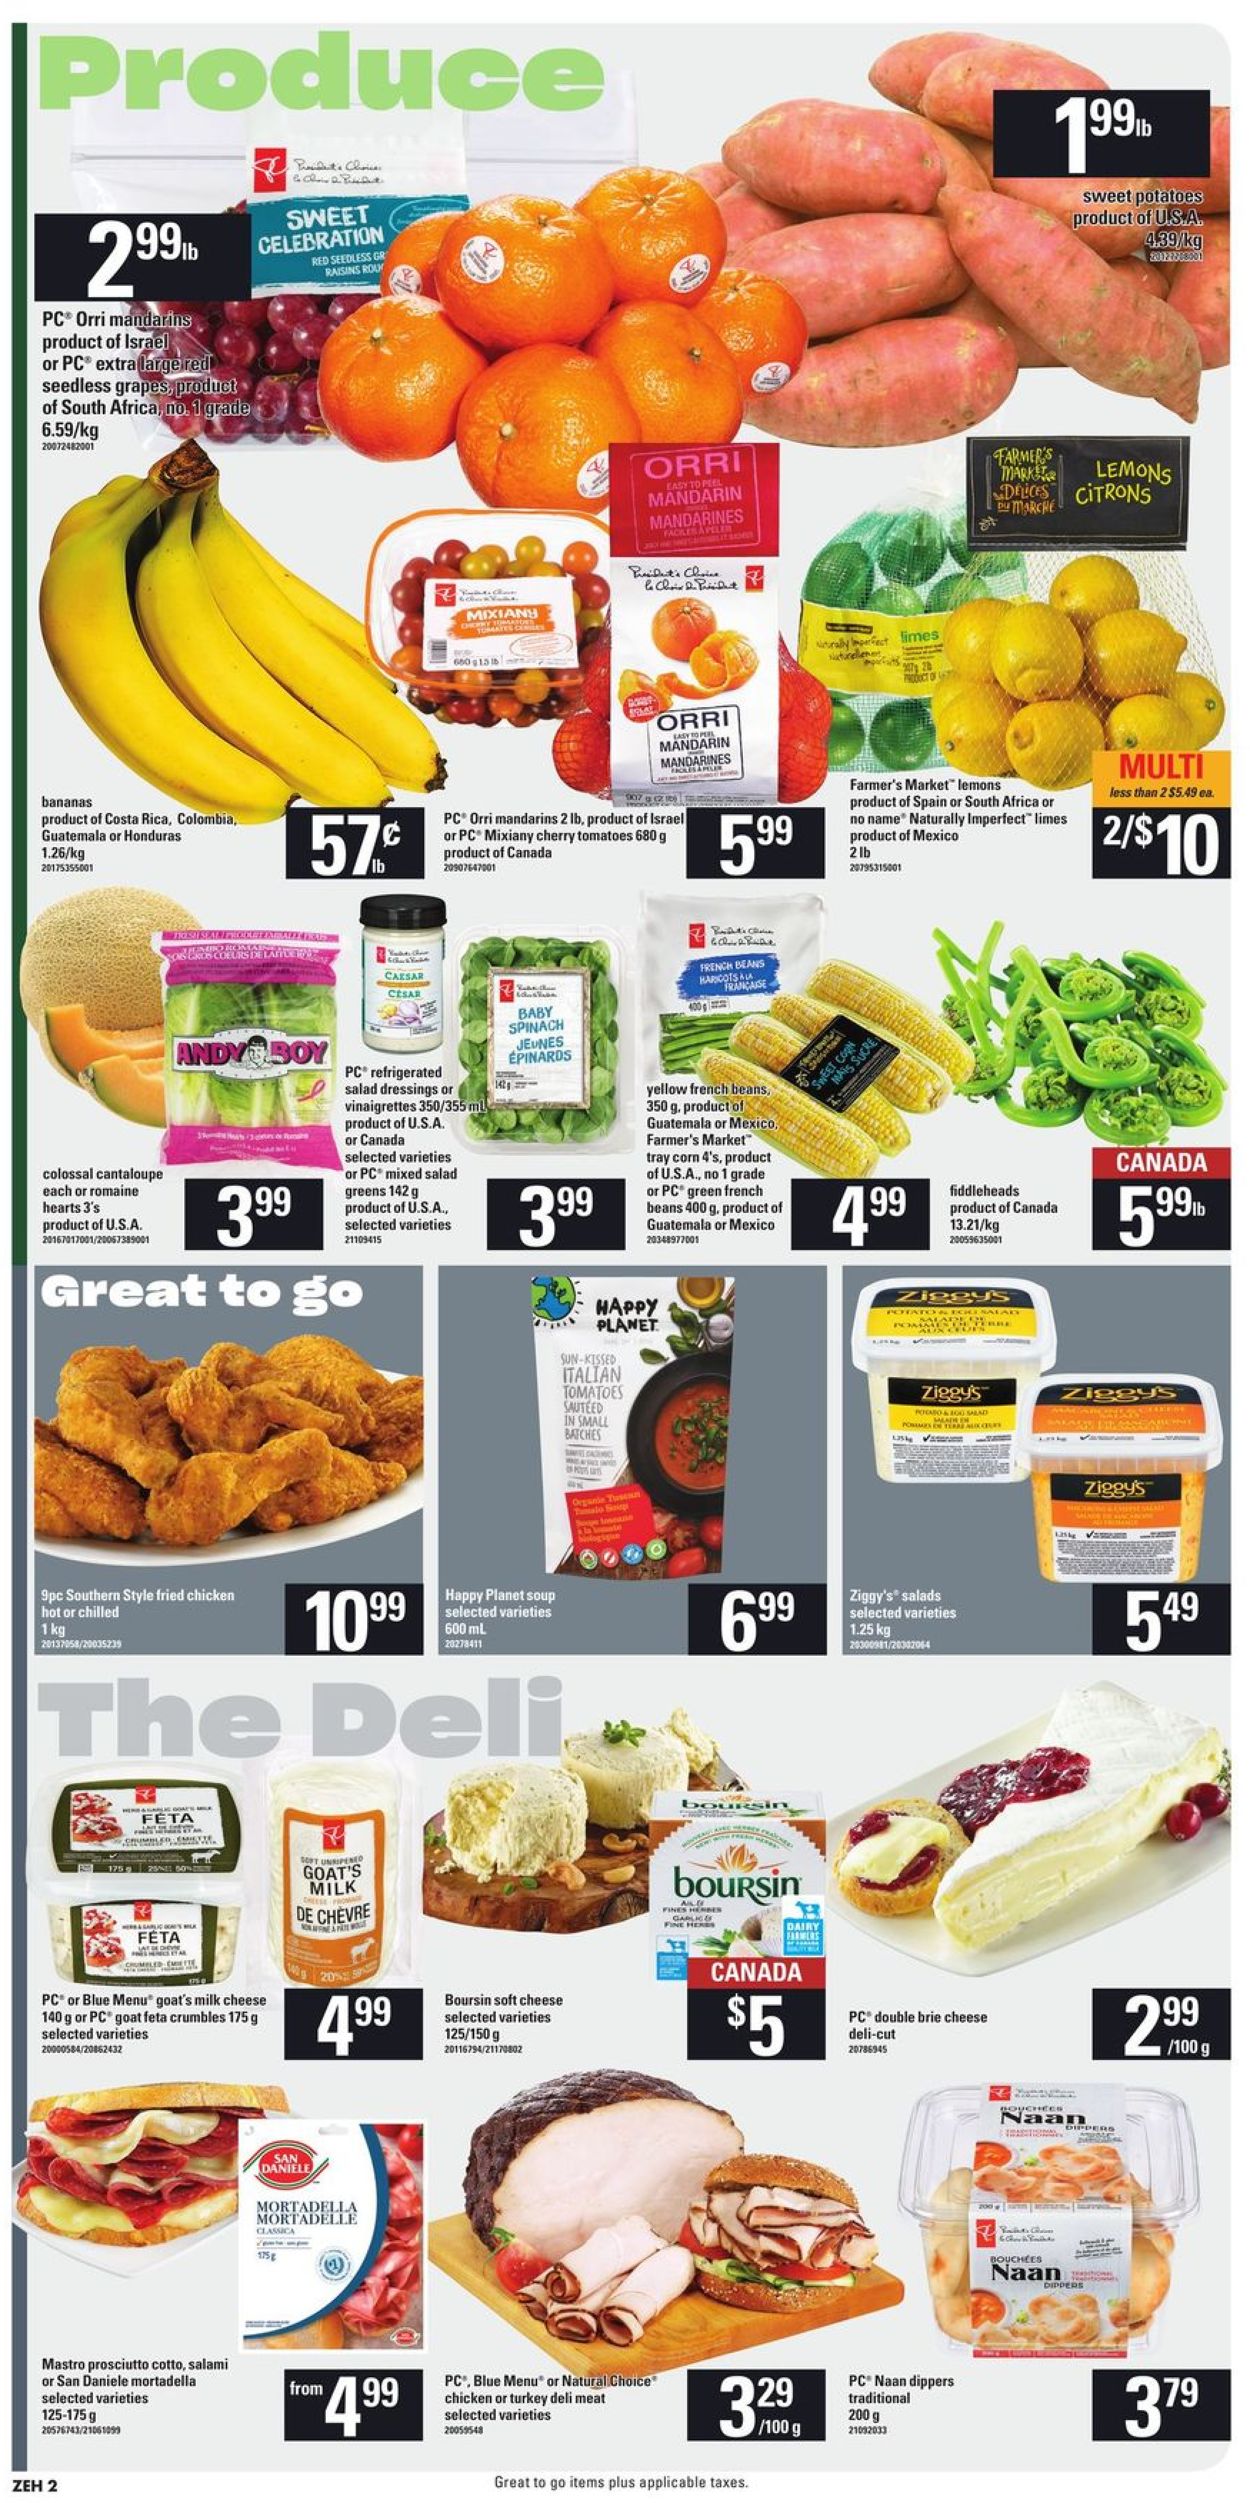 Zehrs Flyer from 05/07/2020